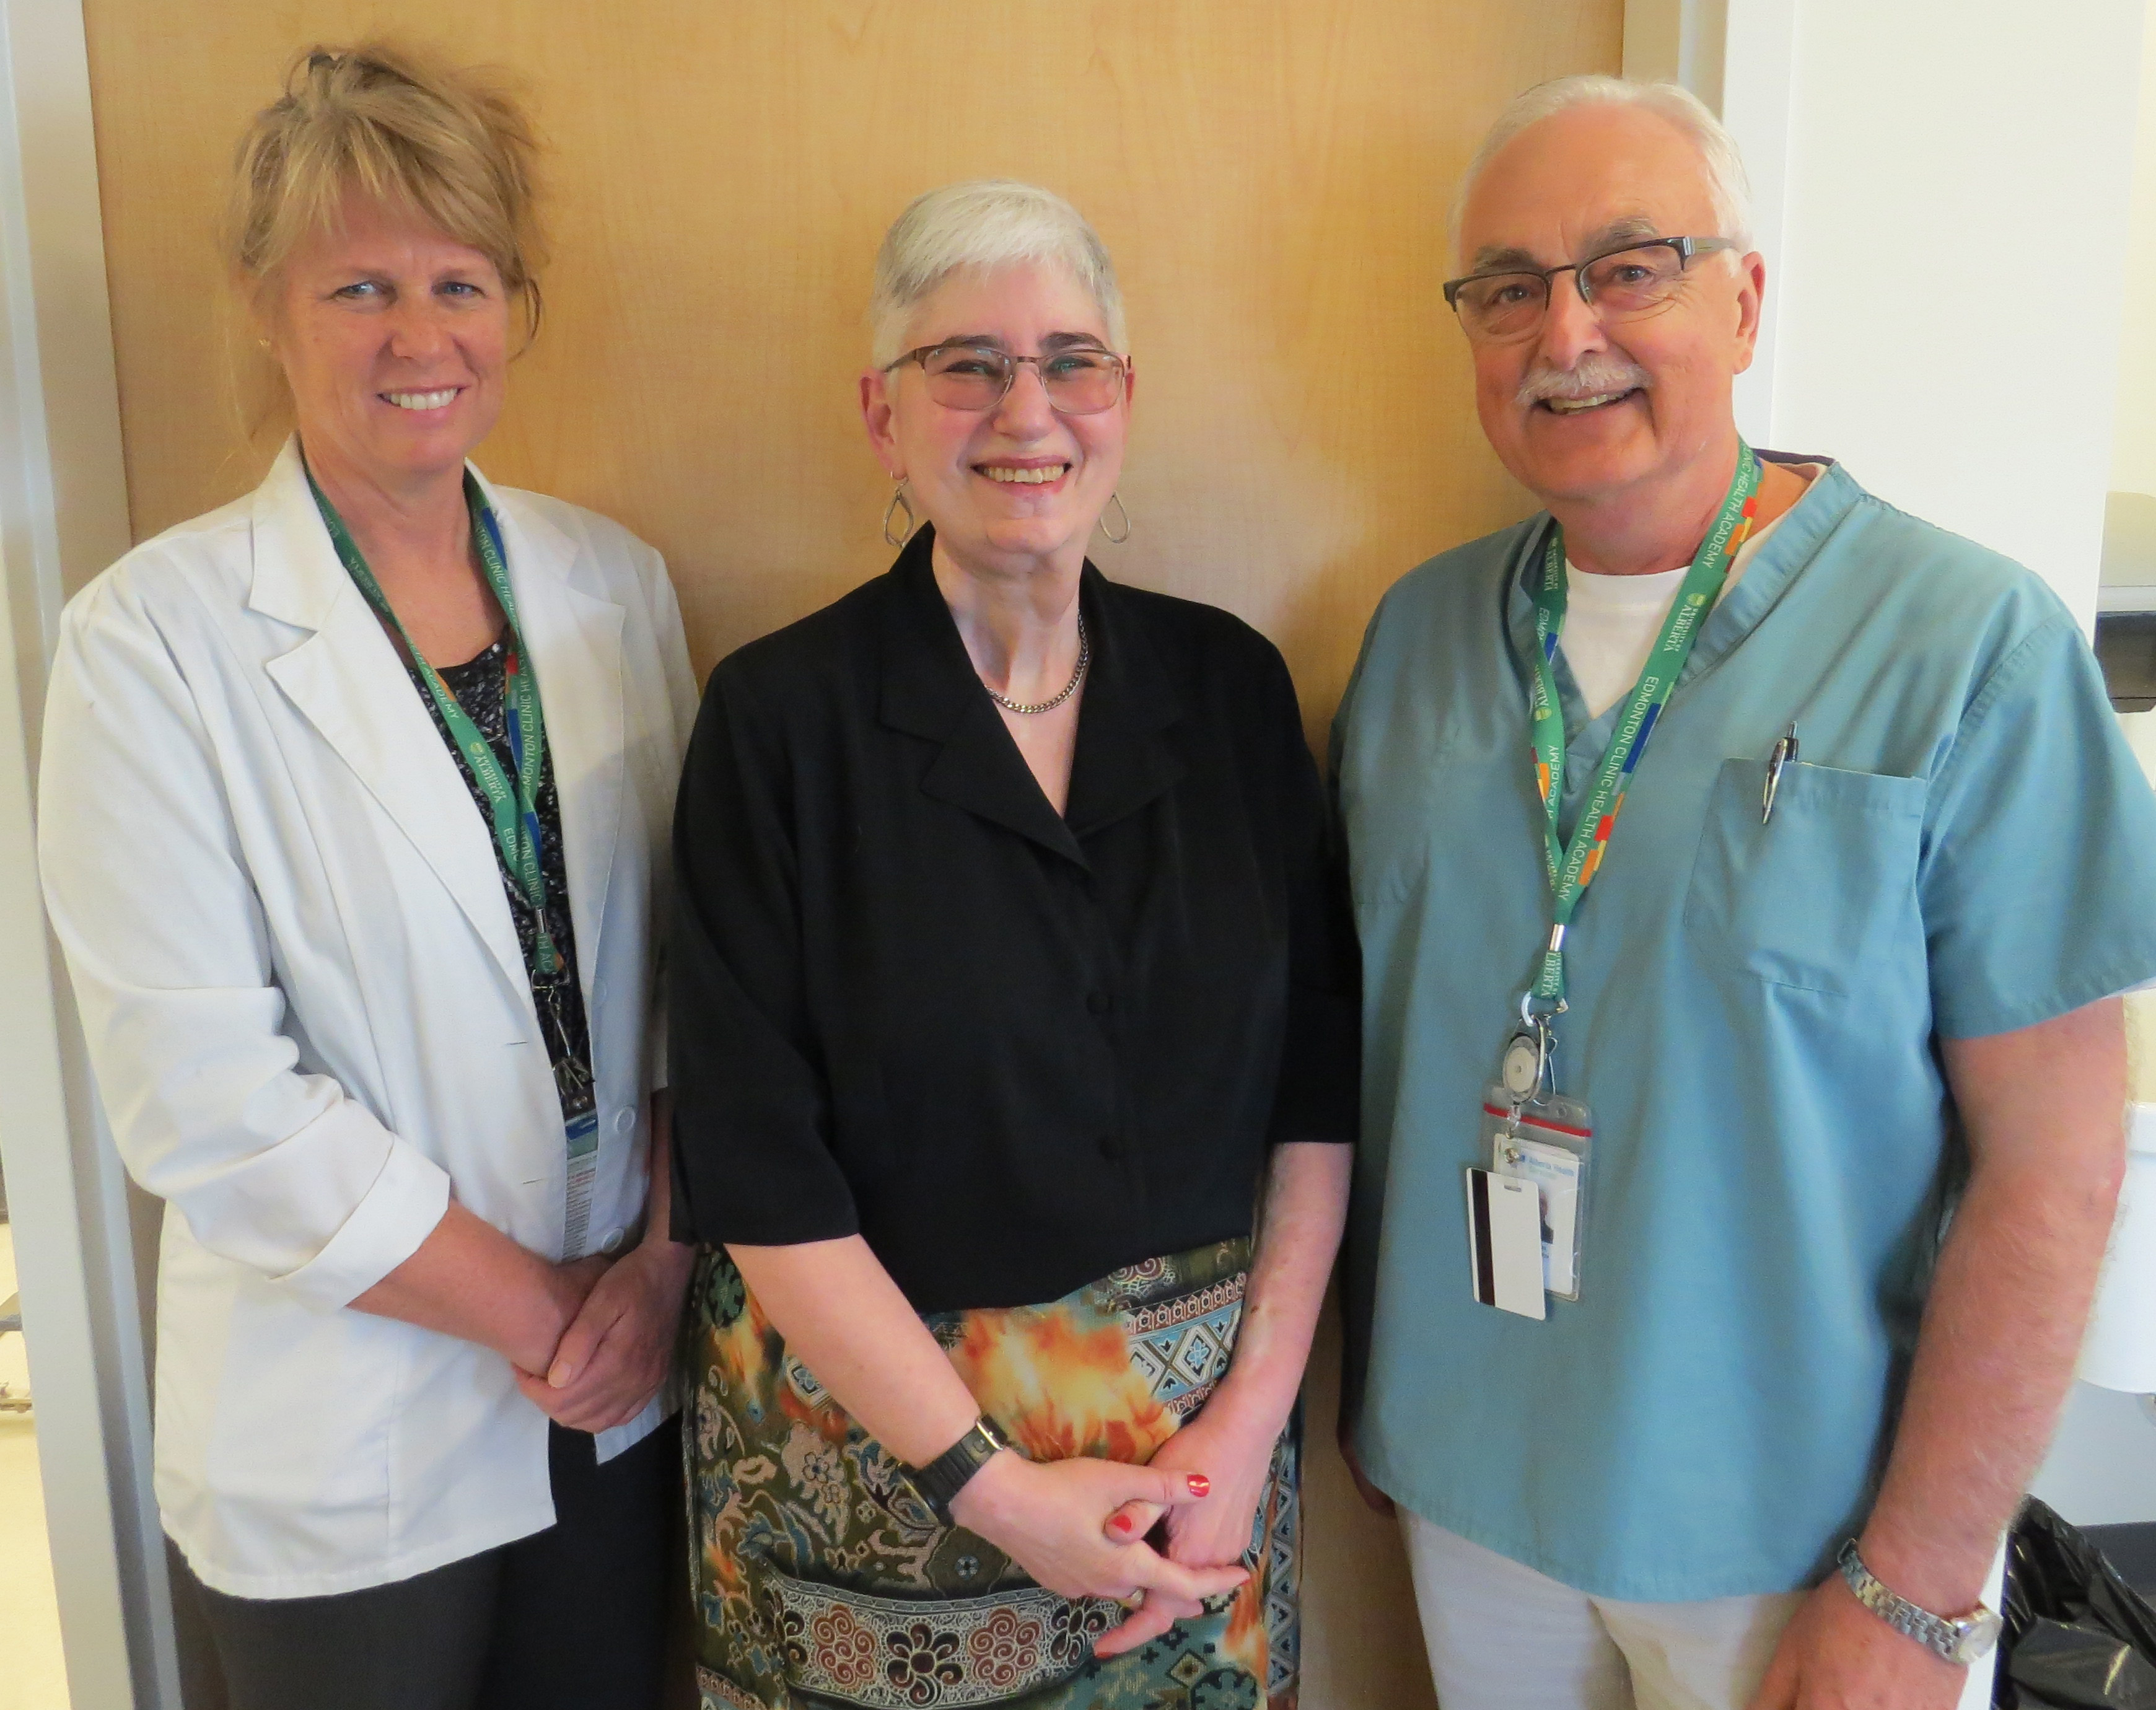 School of Dentistry patient, Pam Hofmann (middle), seen with her oral healthcare team - Arlynn Brodie (left) and Tom Stevenson (right)